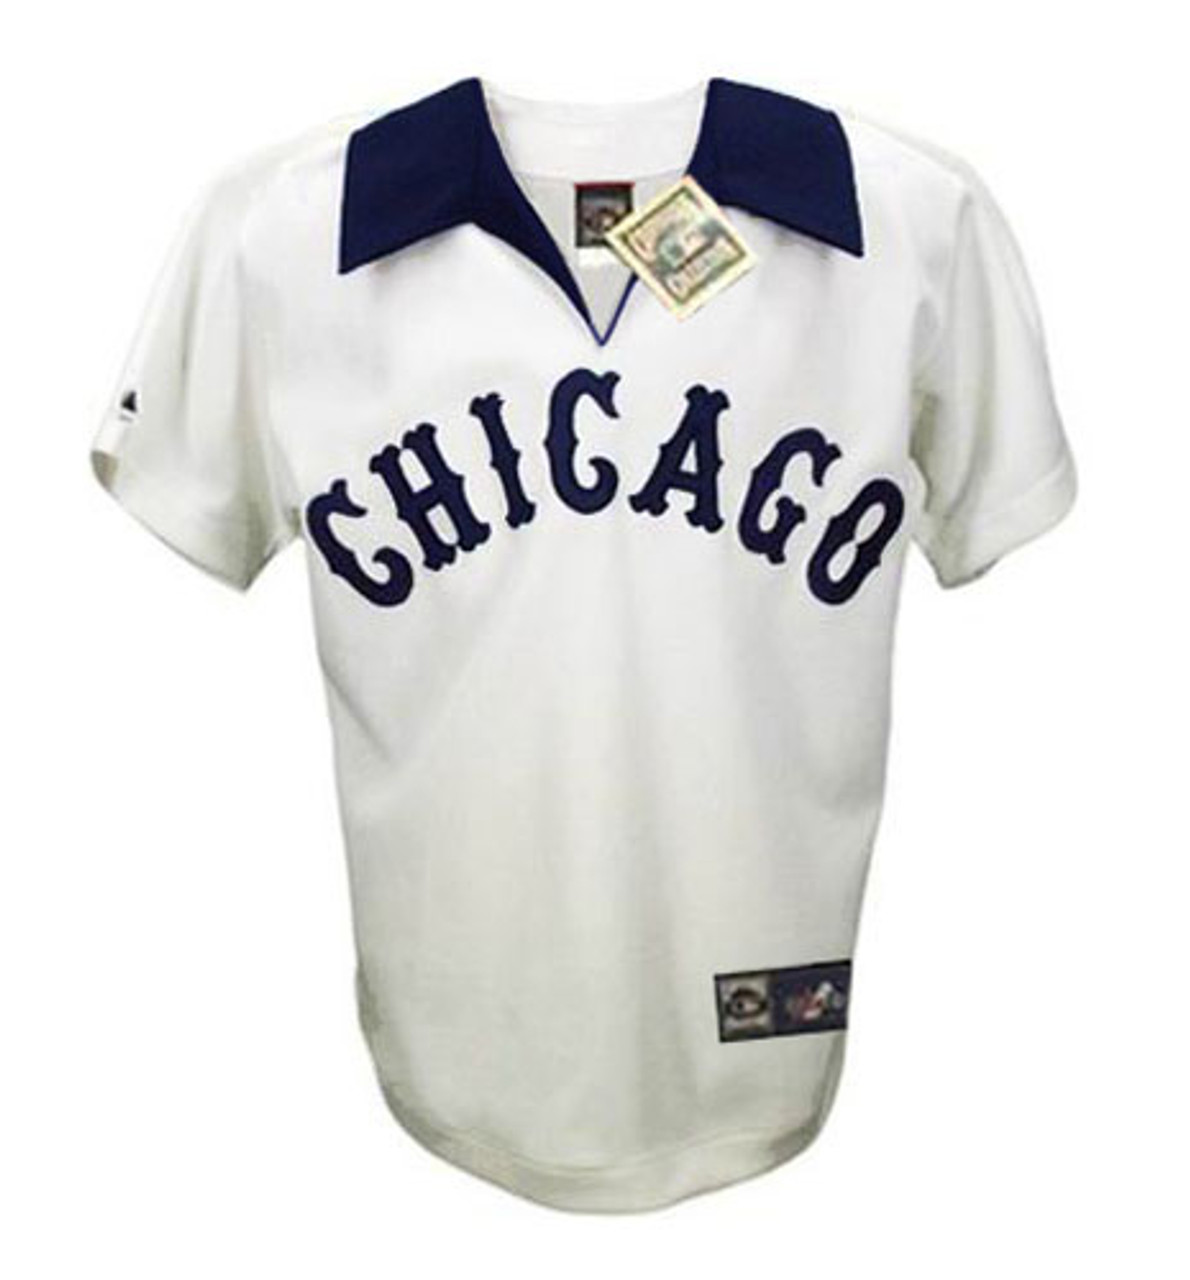 1976 white sox jersey, Off 75%